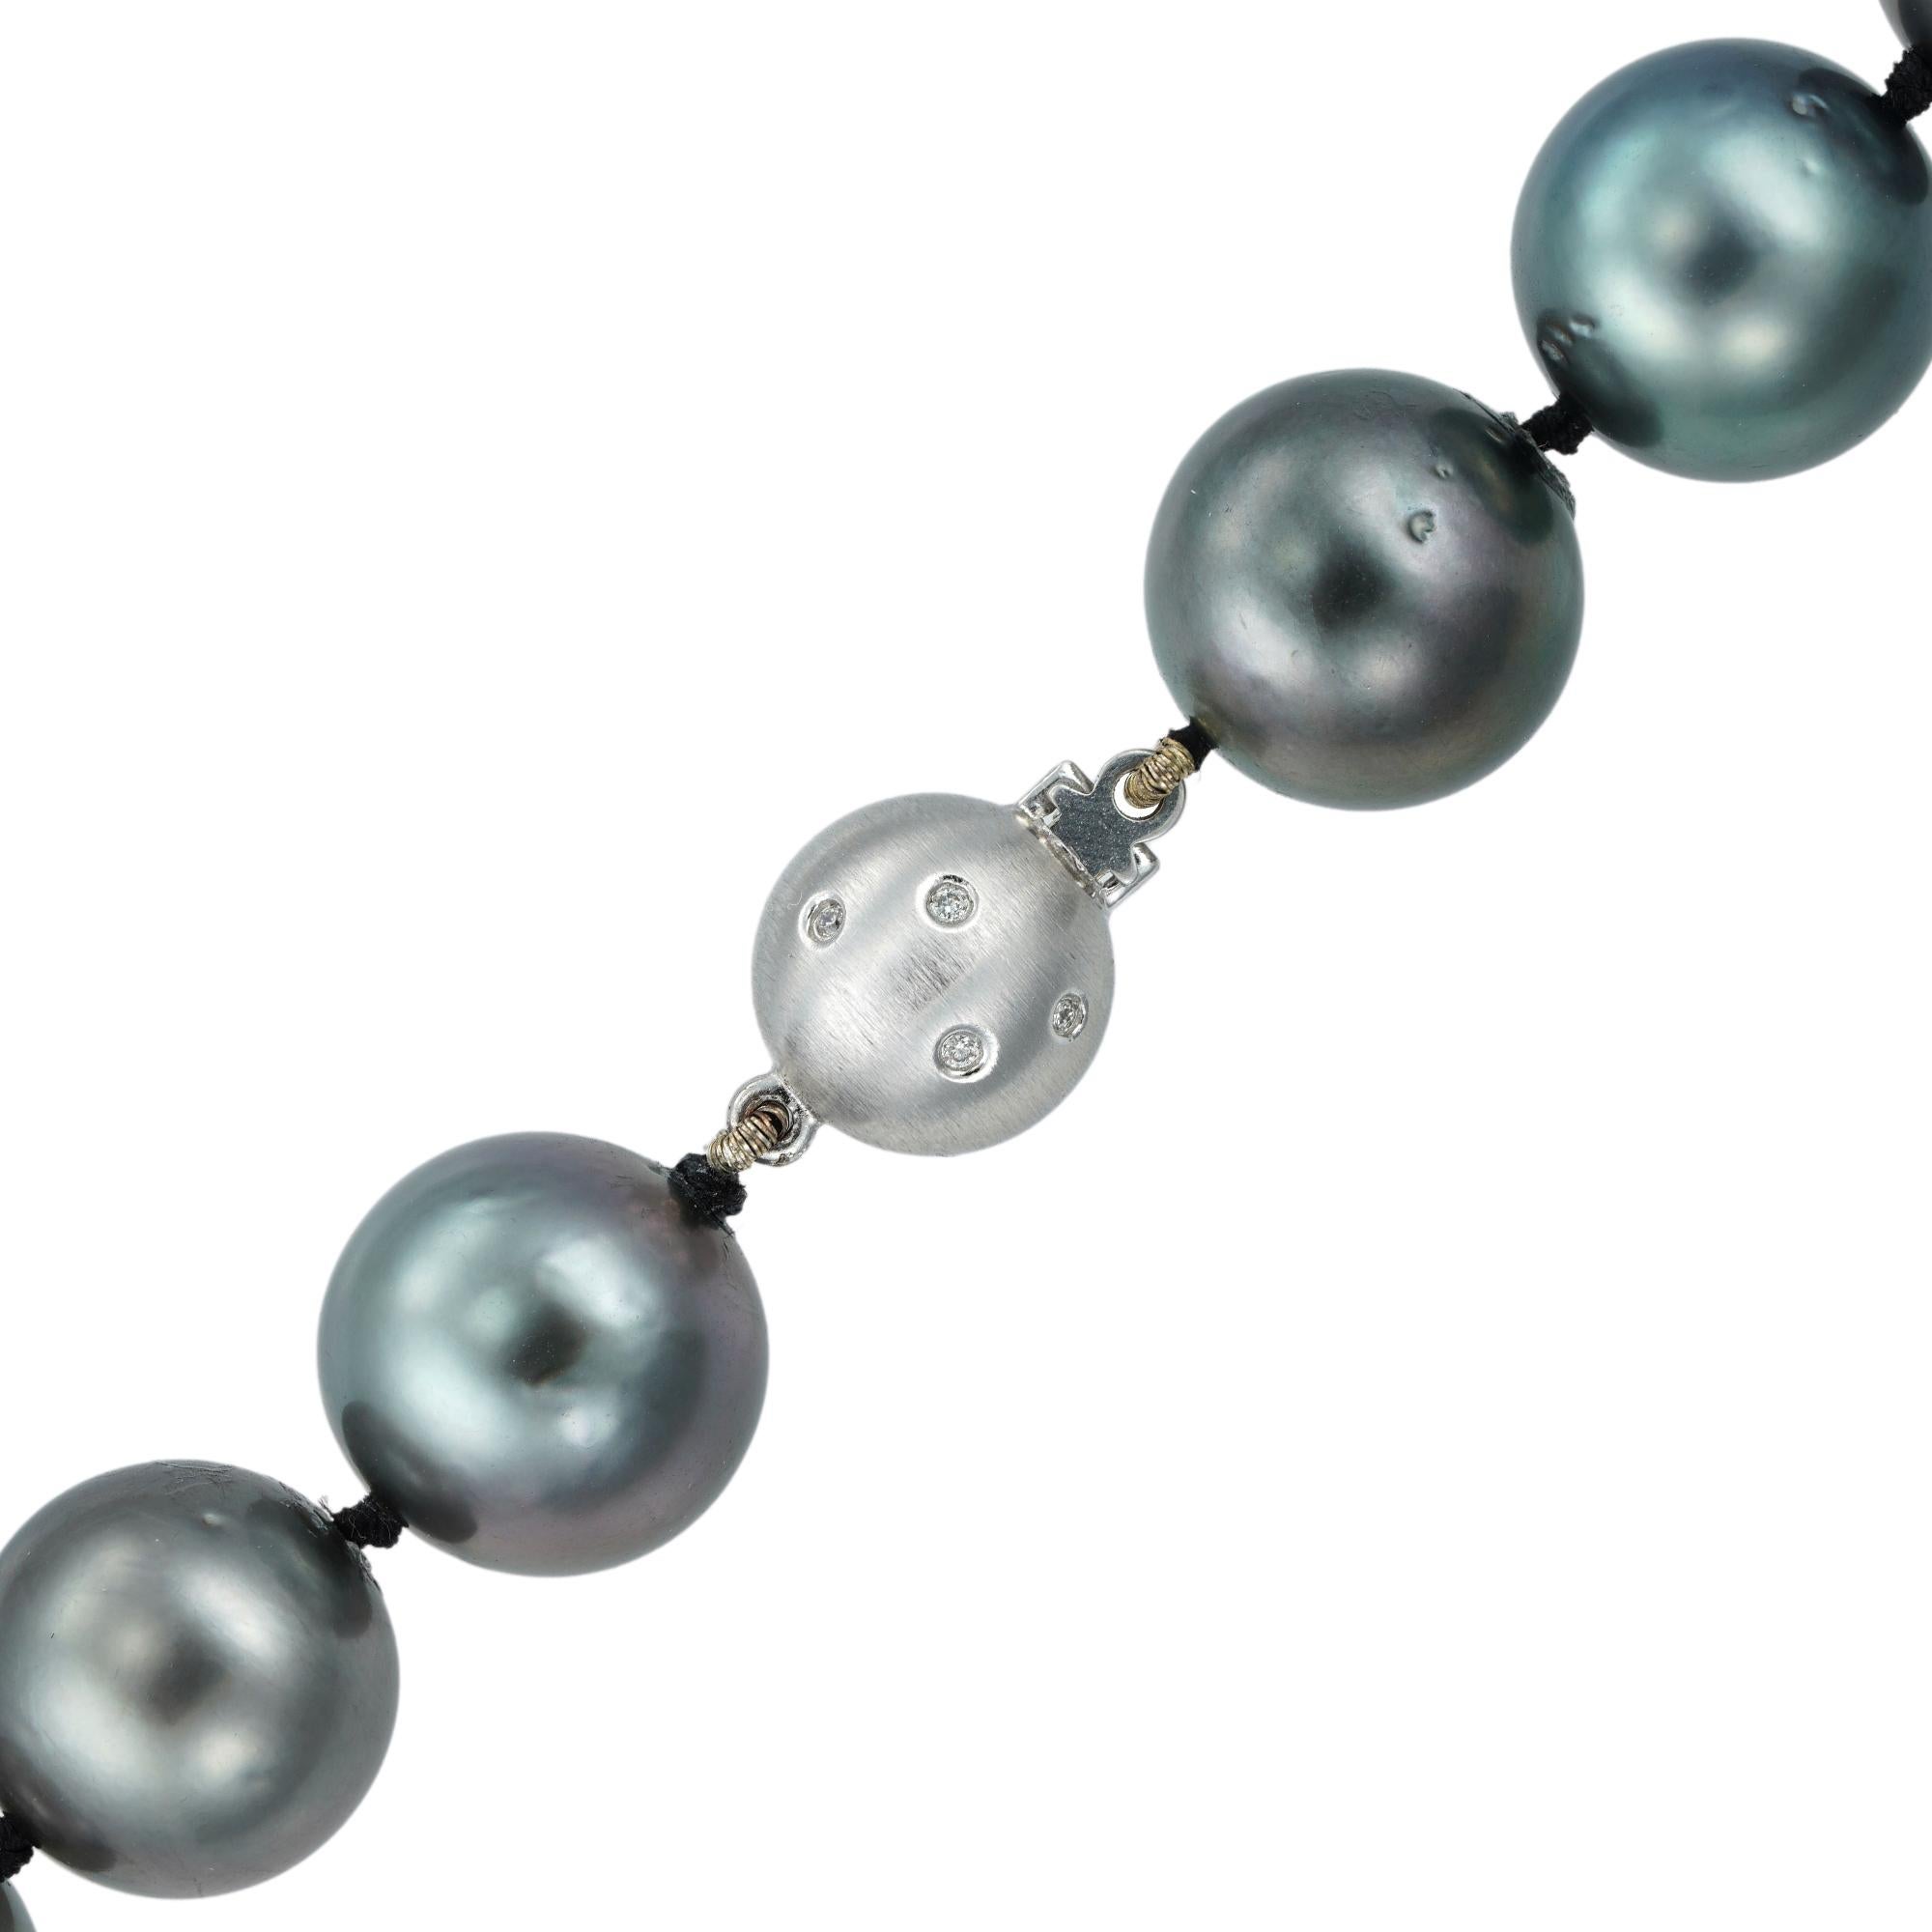 A graduated silver/grey Tahitian pearl necklace, the pearls graduating from  15.5mm to 12mm from the centre, double knotted and  fitted with a matte white gold ball clasp set with eight round brilliant cut diamonds of 0.04 carats in total, bearing